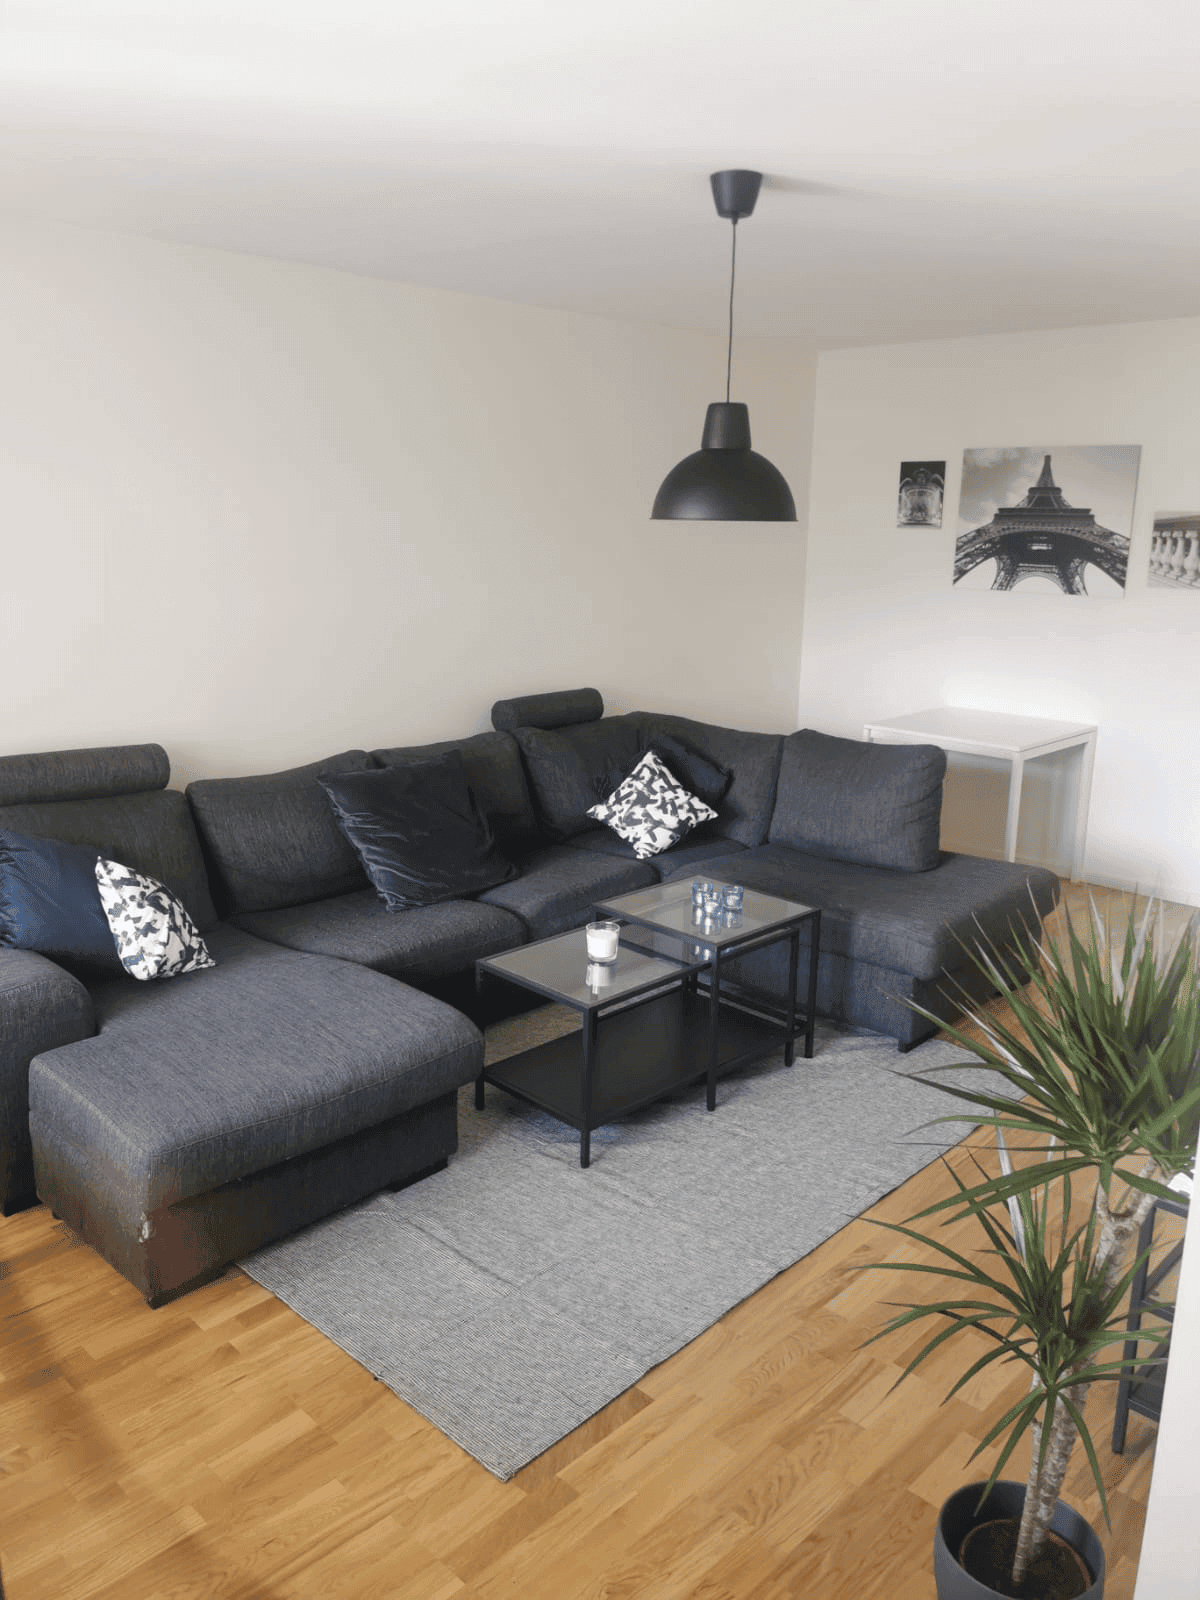 Living room with a big grey couch